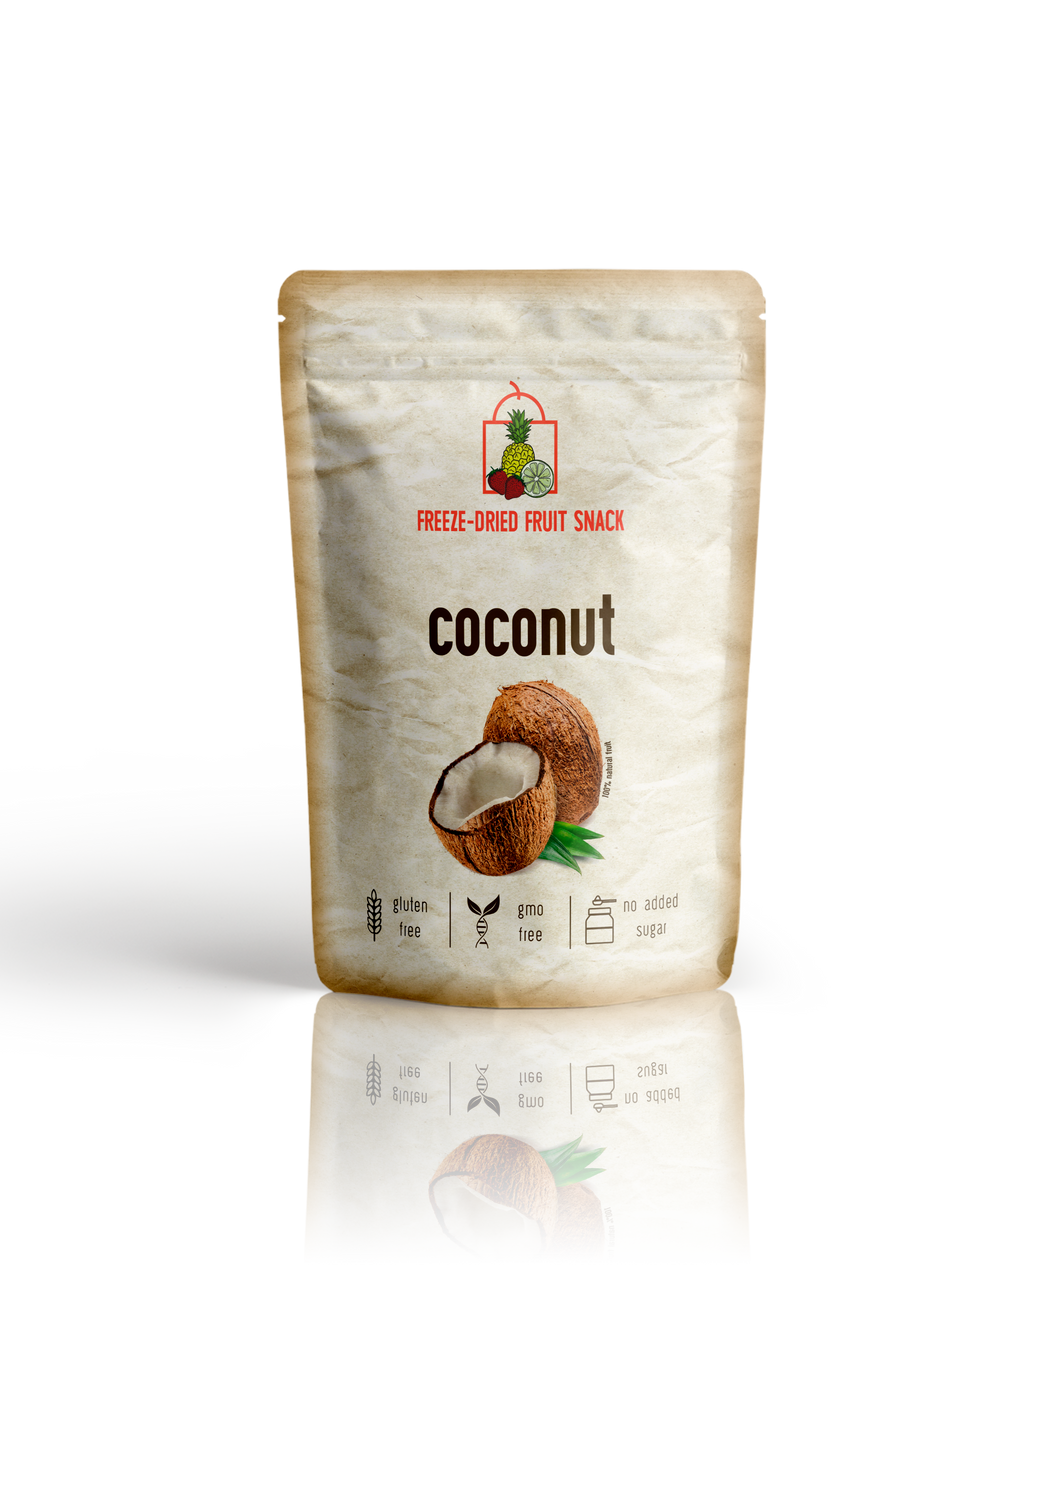 Freeze-Dried Coconut Snack Pouch by The Rotten Fruit Box